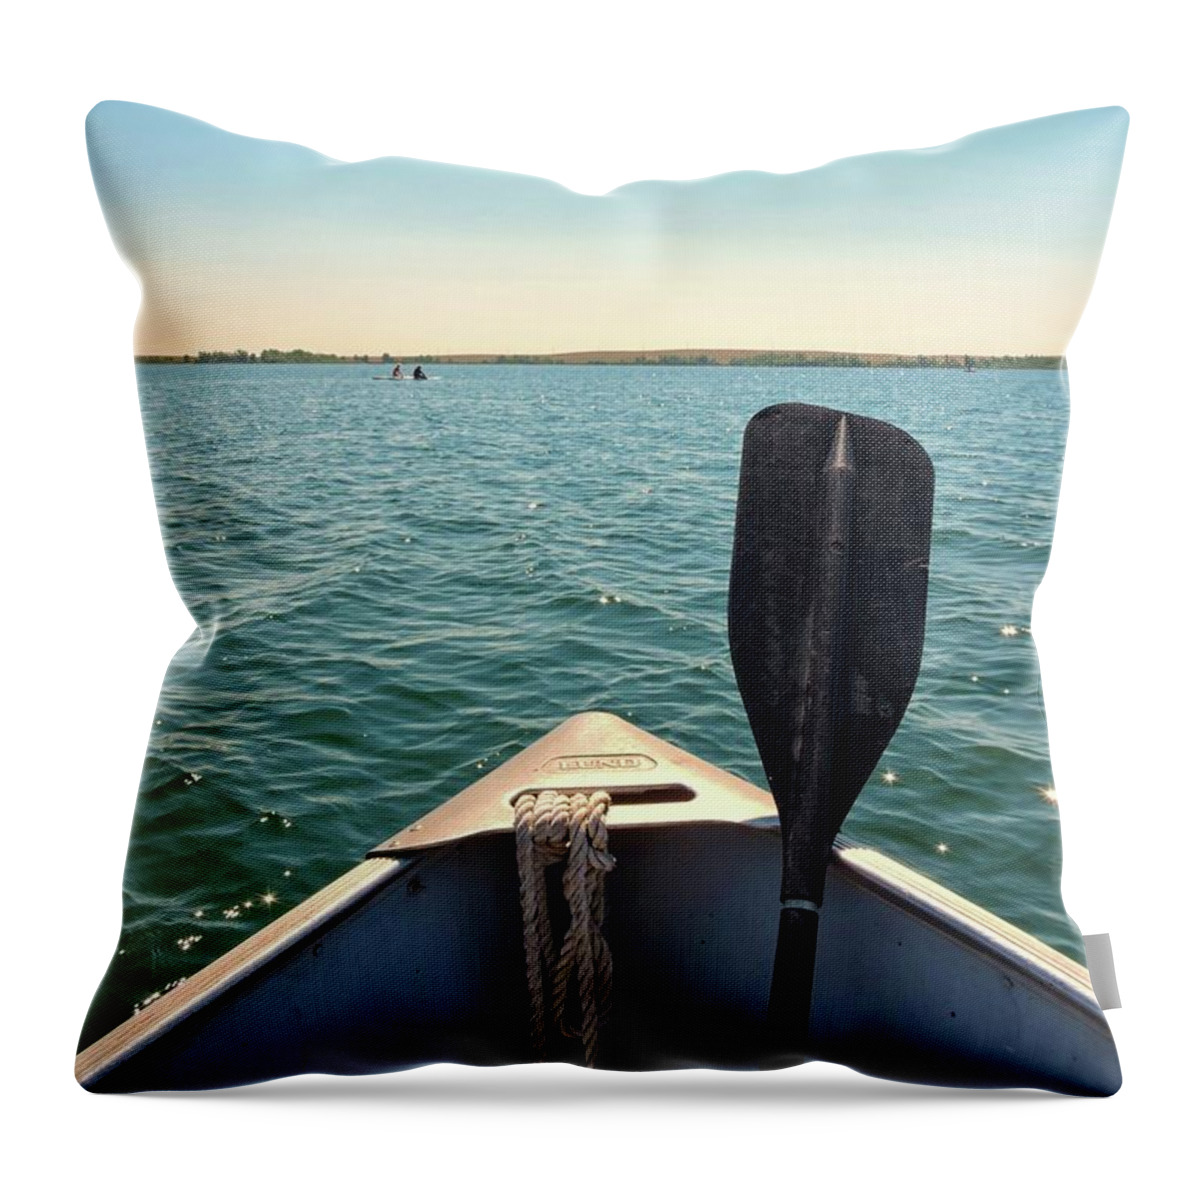 Row Boat Throw Pillow featuring the photograph Aurora Row Boat by Connor Beekman